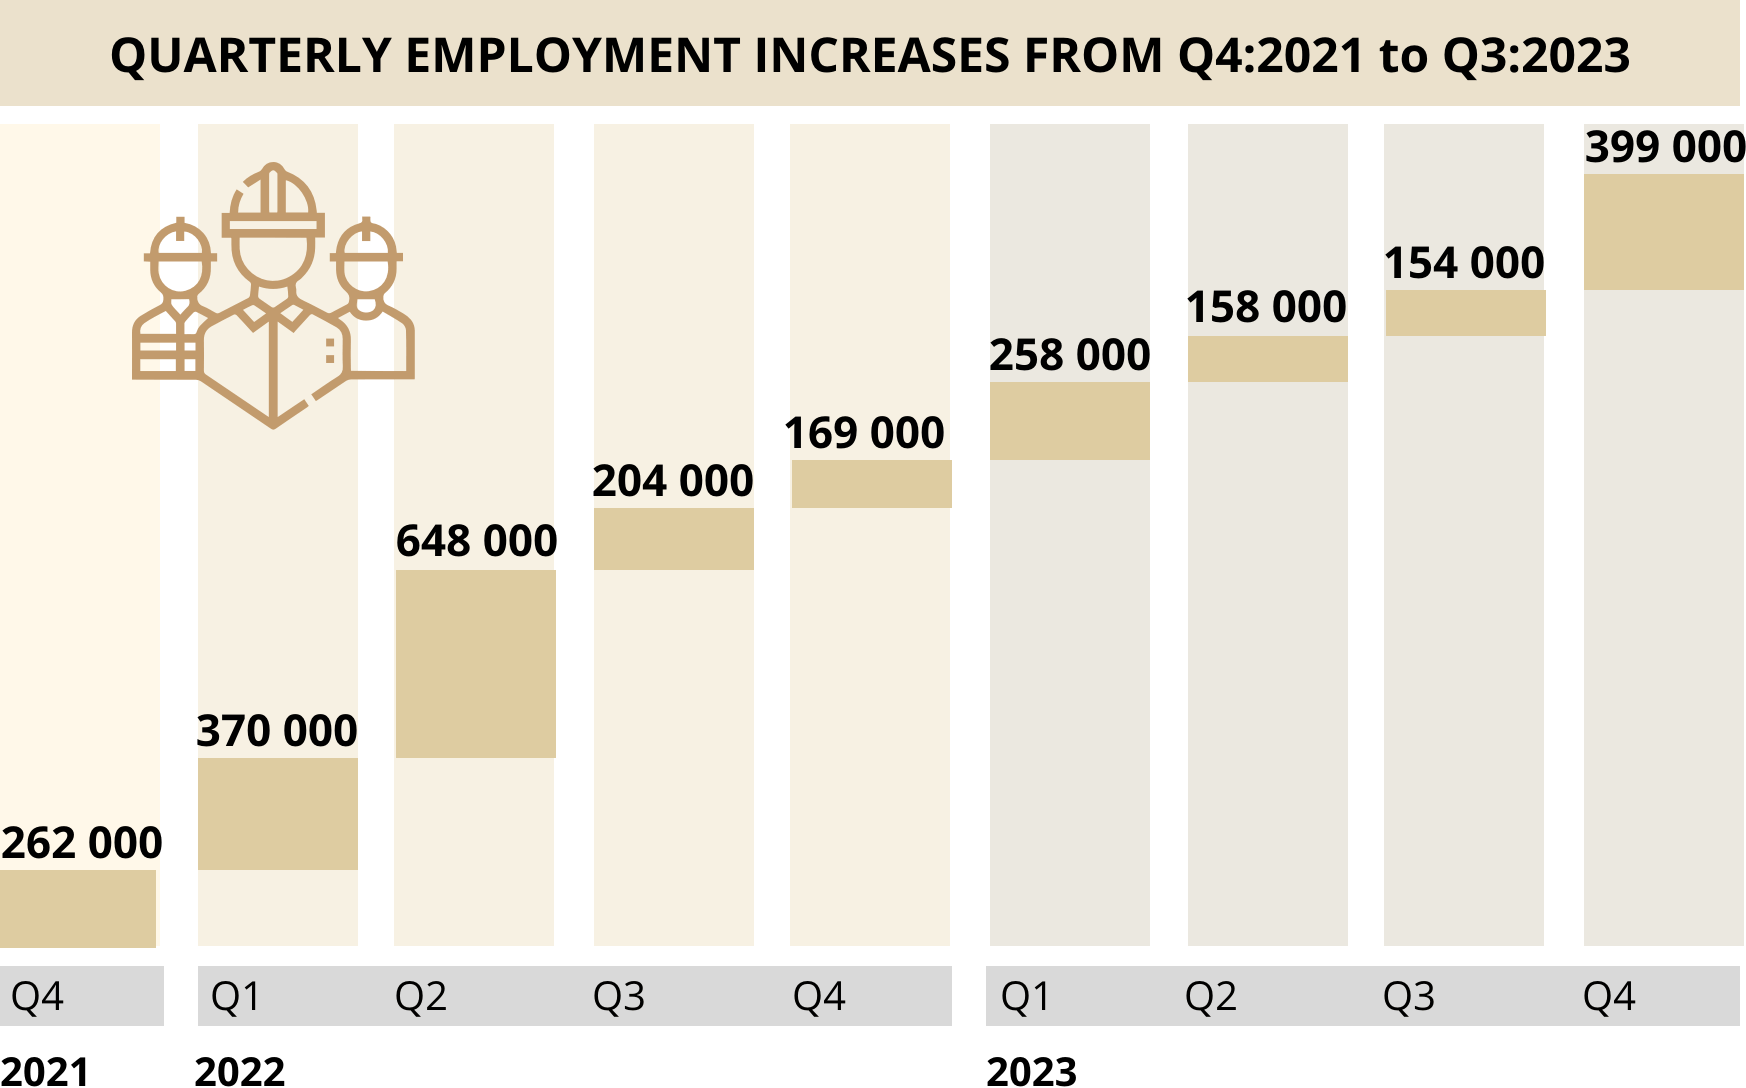 /assets/employment-increases.png